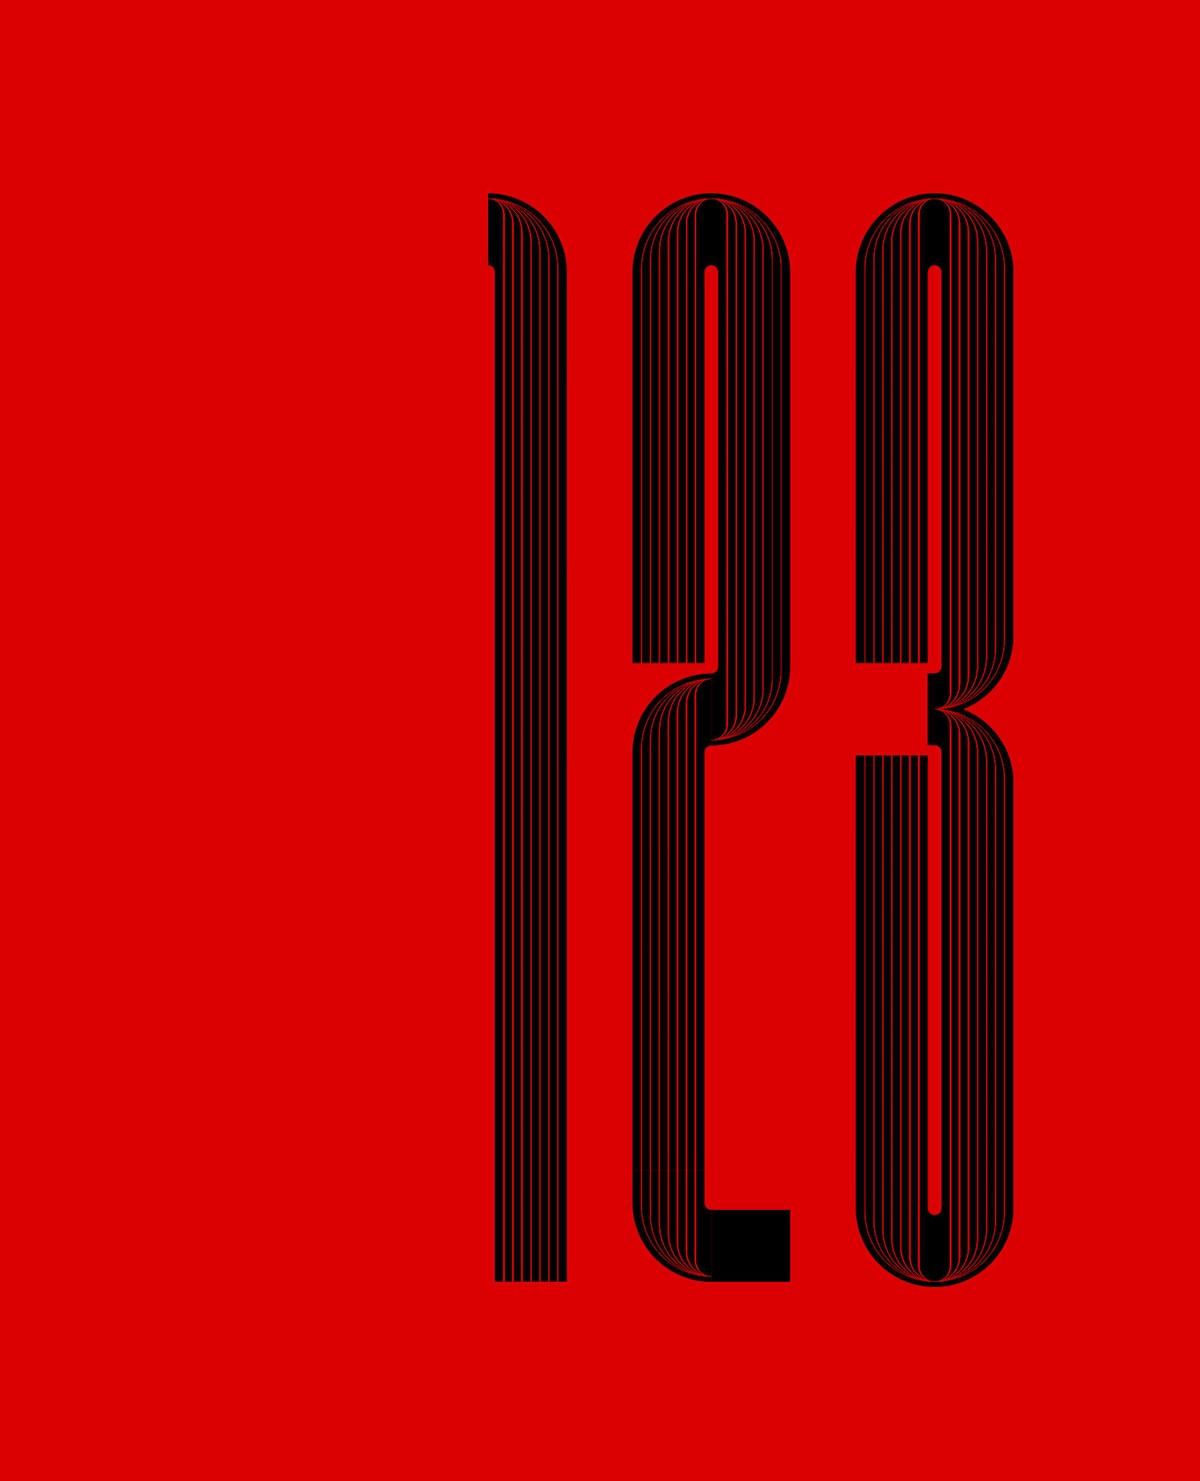 1896. Type experiment. Vertical 1-3. Bespoke typography design by Superfried.